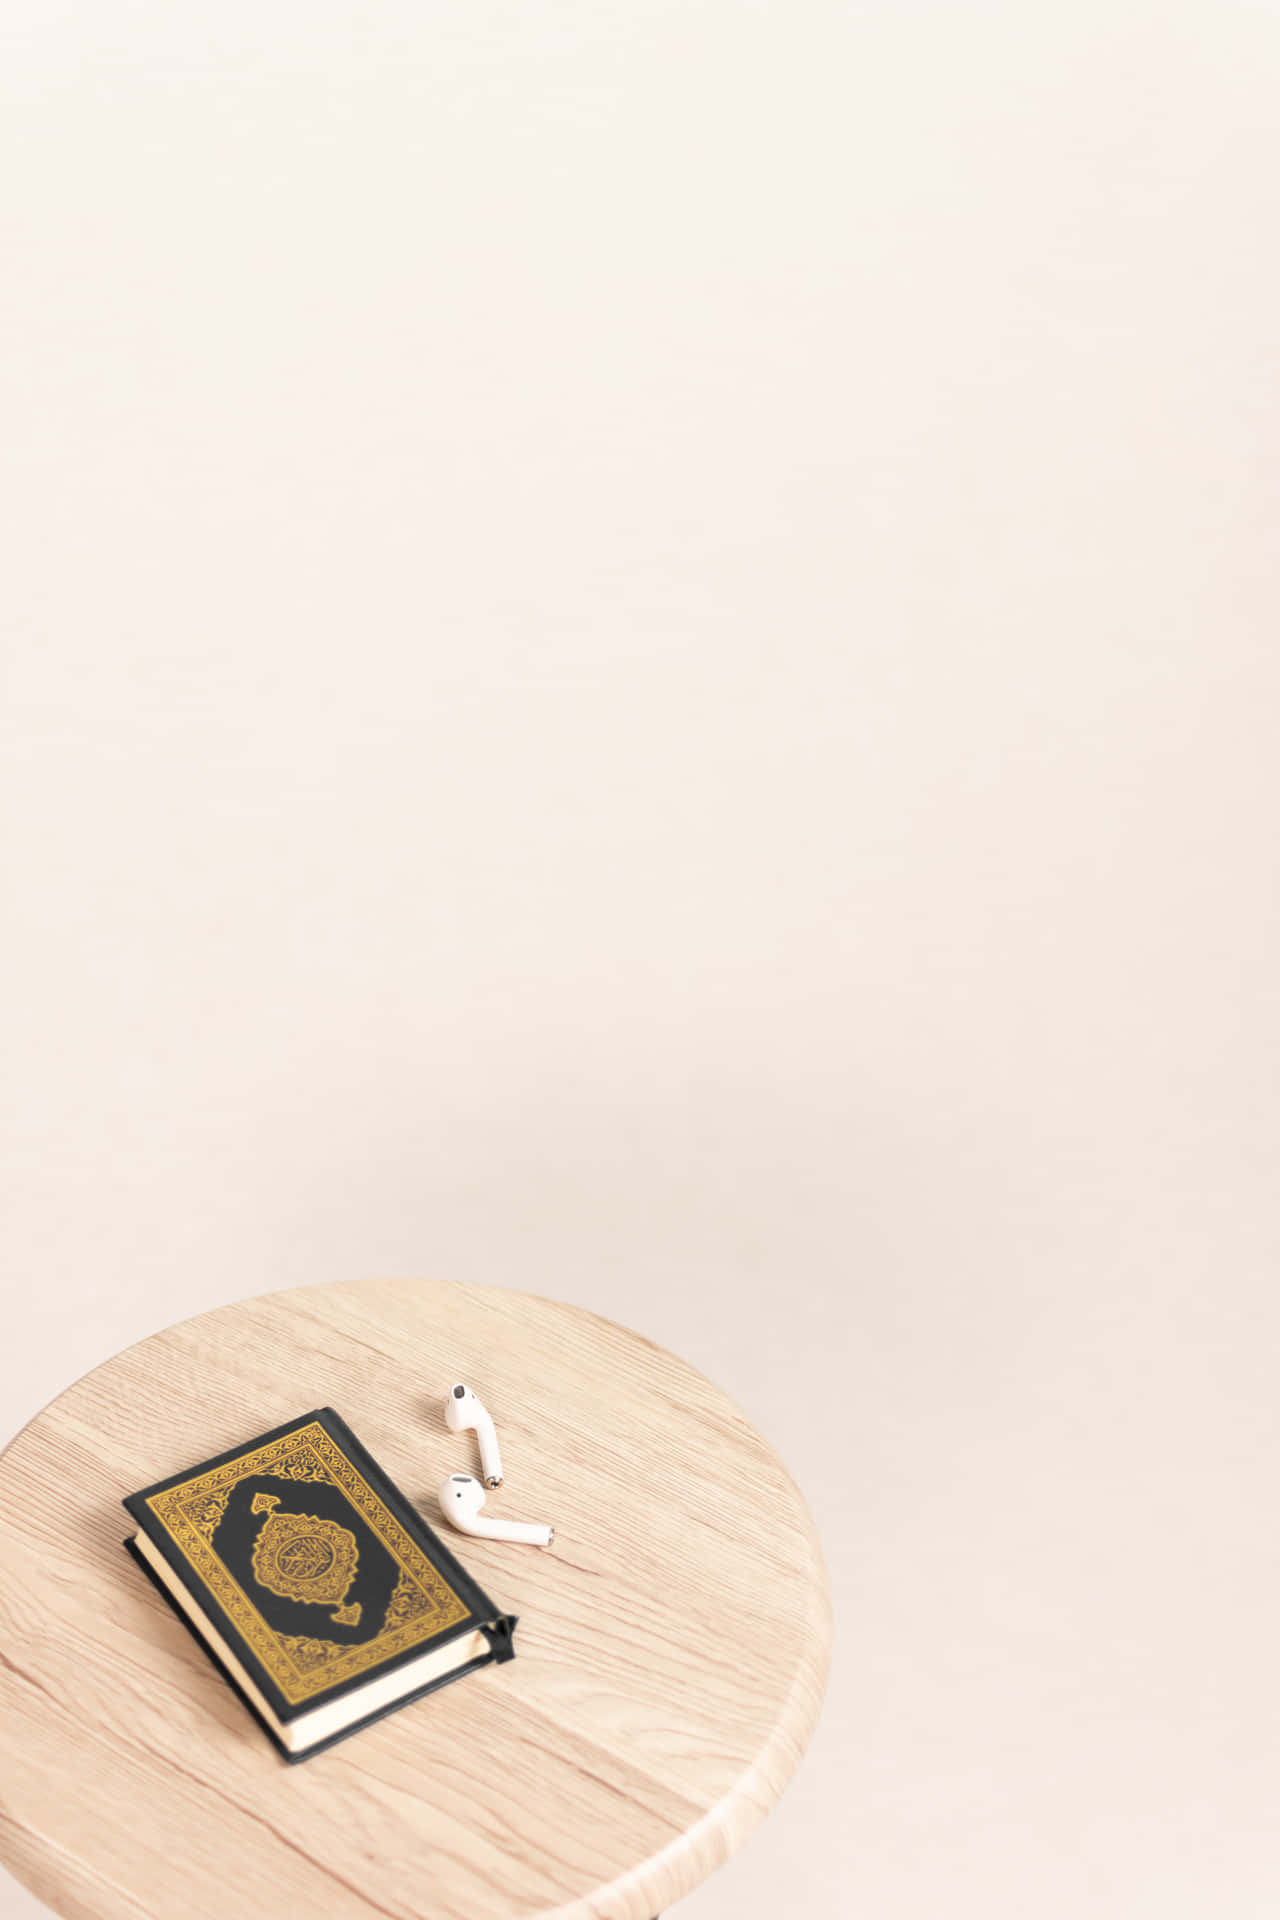 Quran Next To AirPods Islamic Background